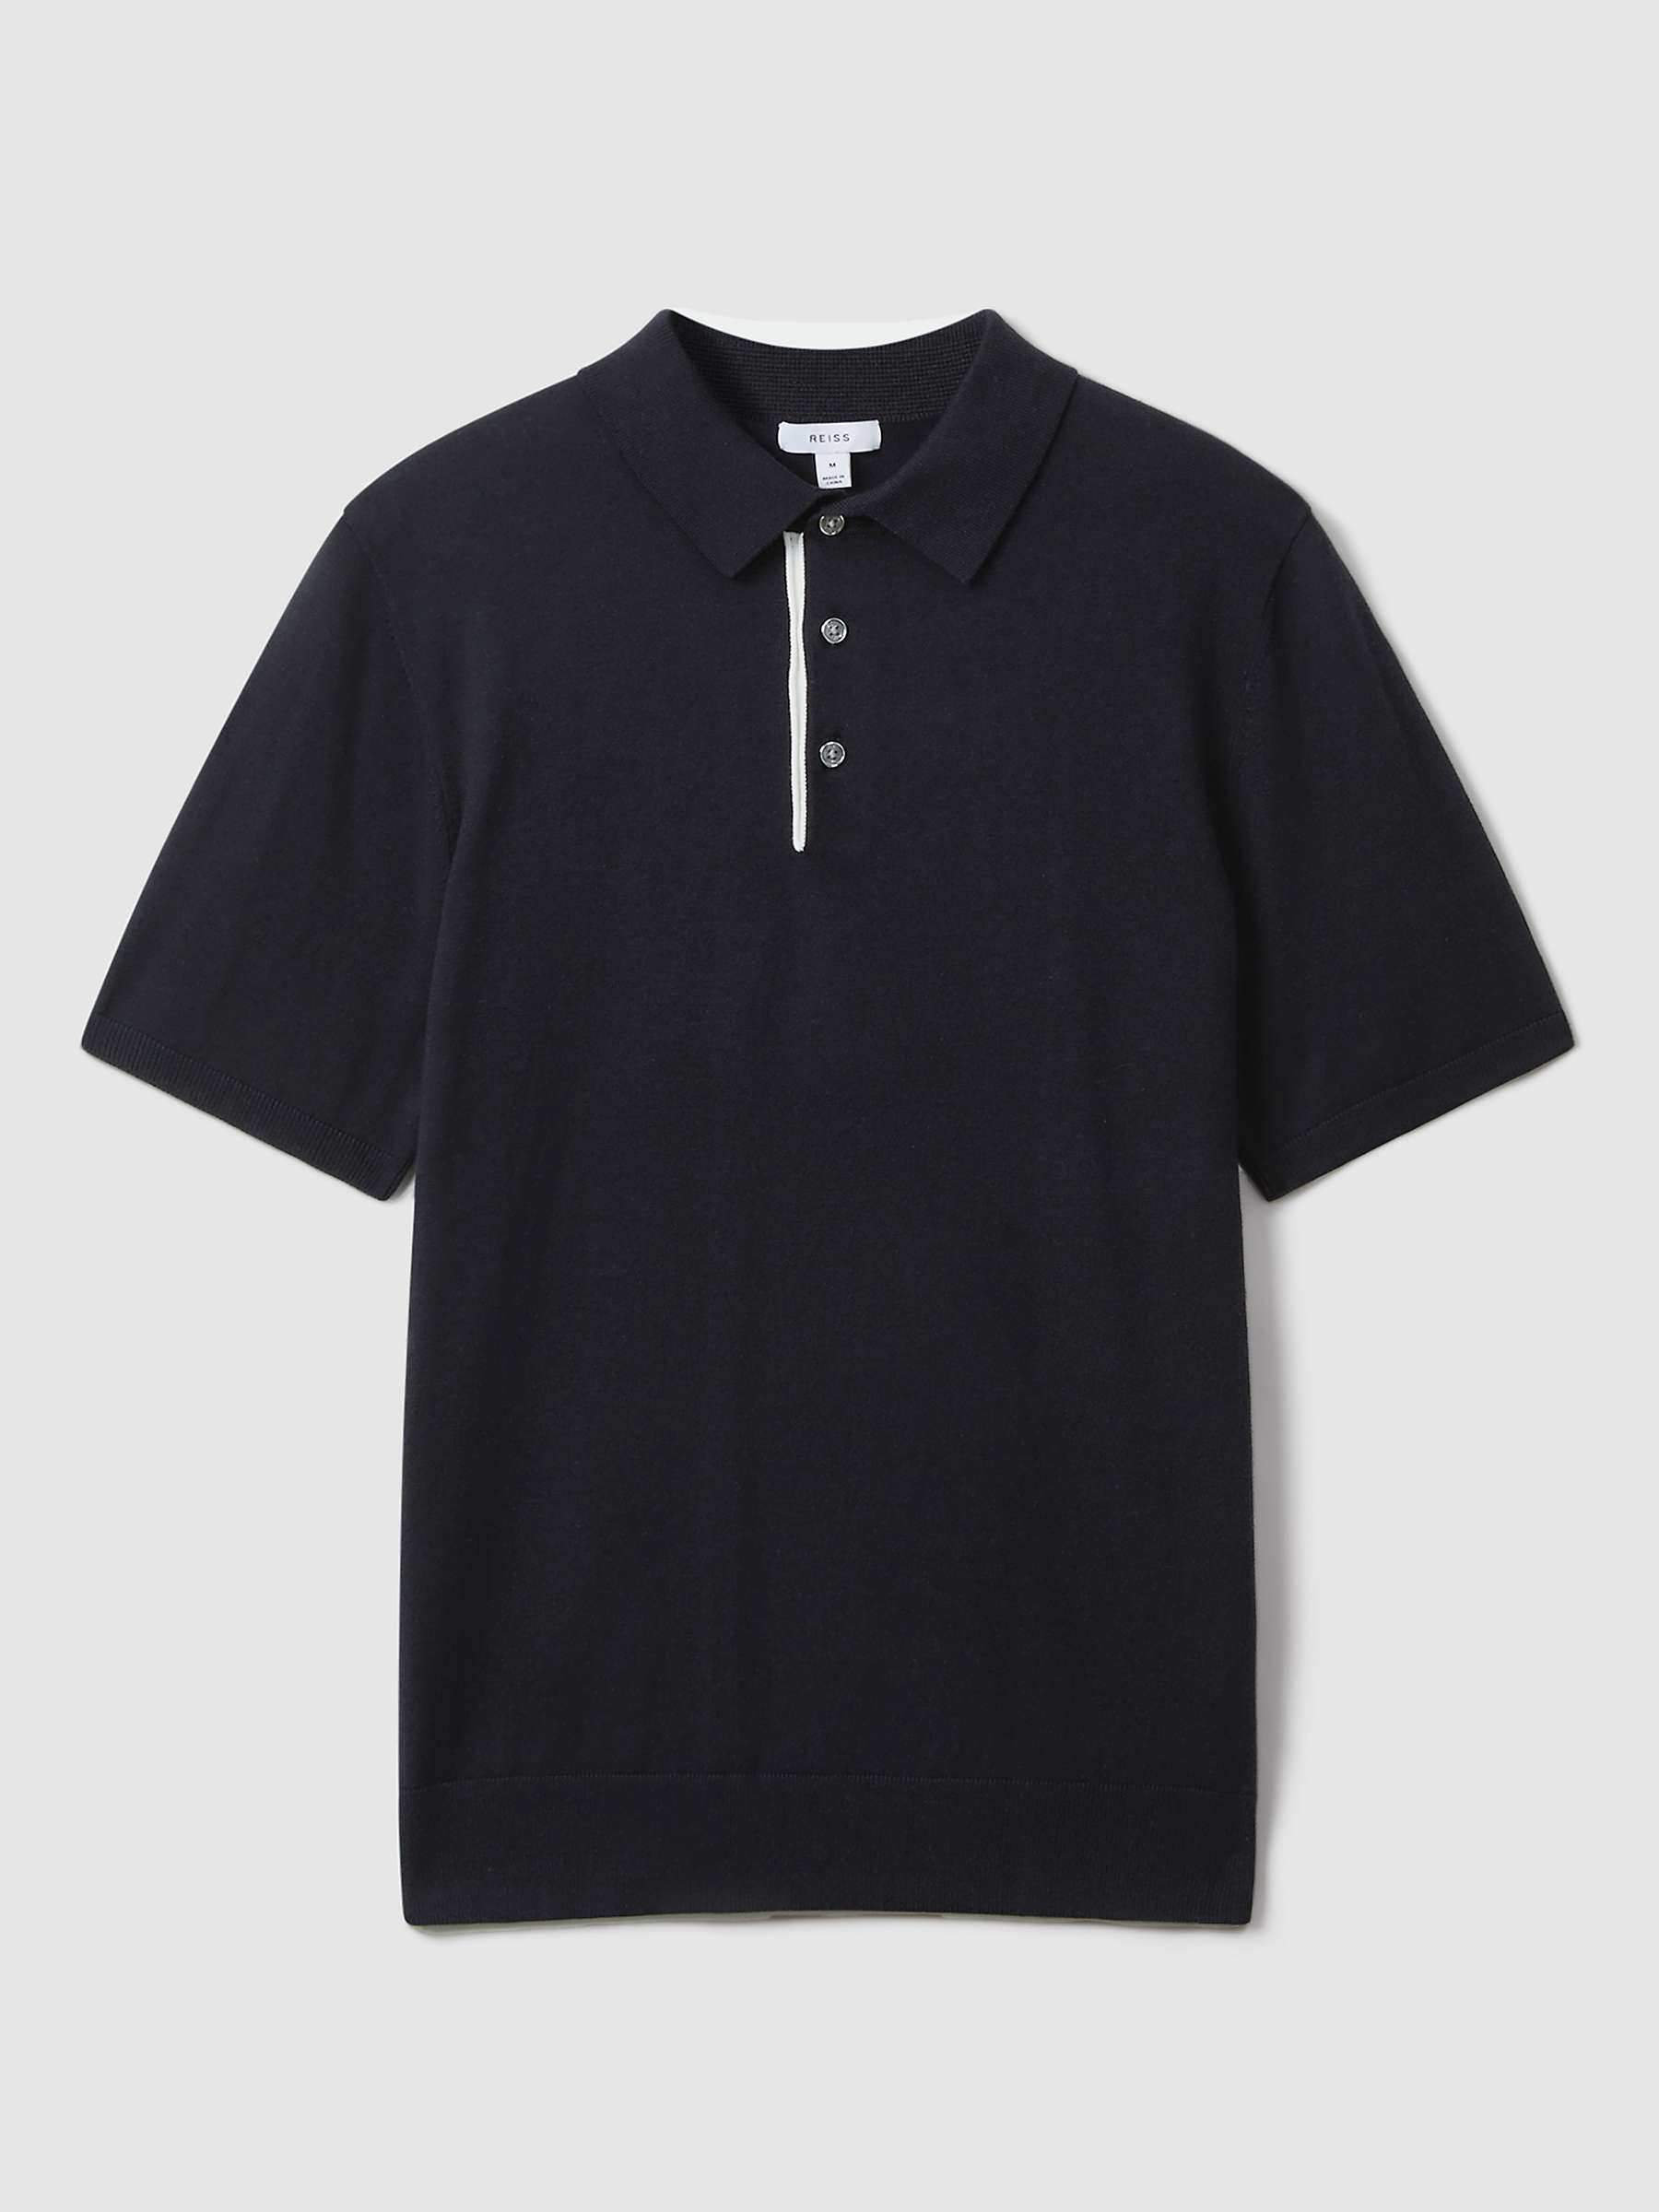 Buy Reiss Finch Knitted Polo Shirt, Navy Online at johnlewis.com